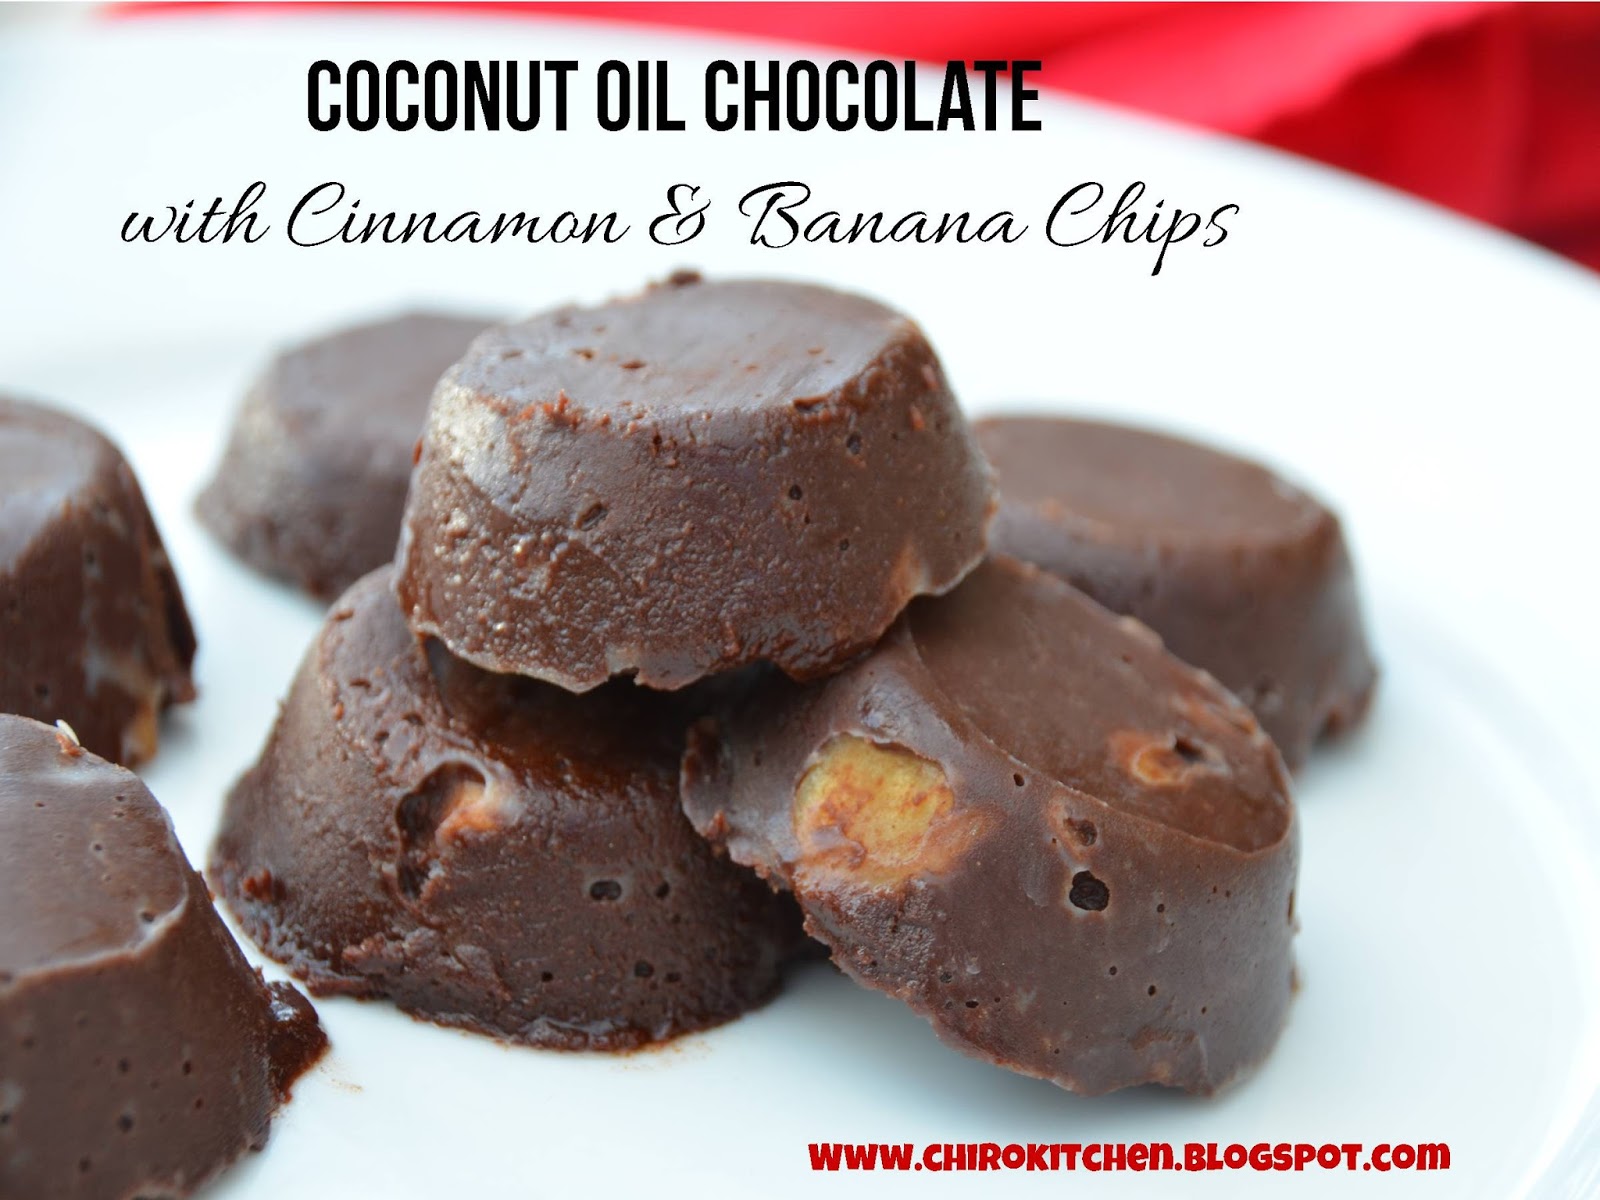 Chiro Kitchen: The Complete Guide to Homemade Coconut Oil Chocolate